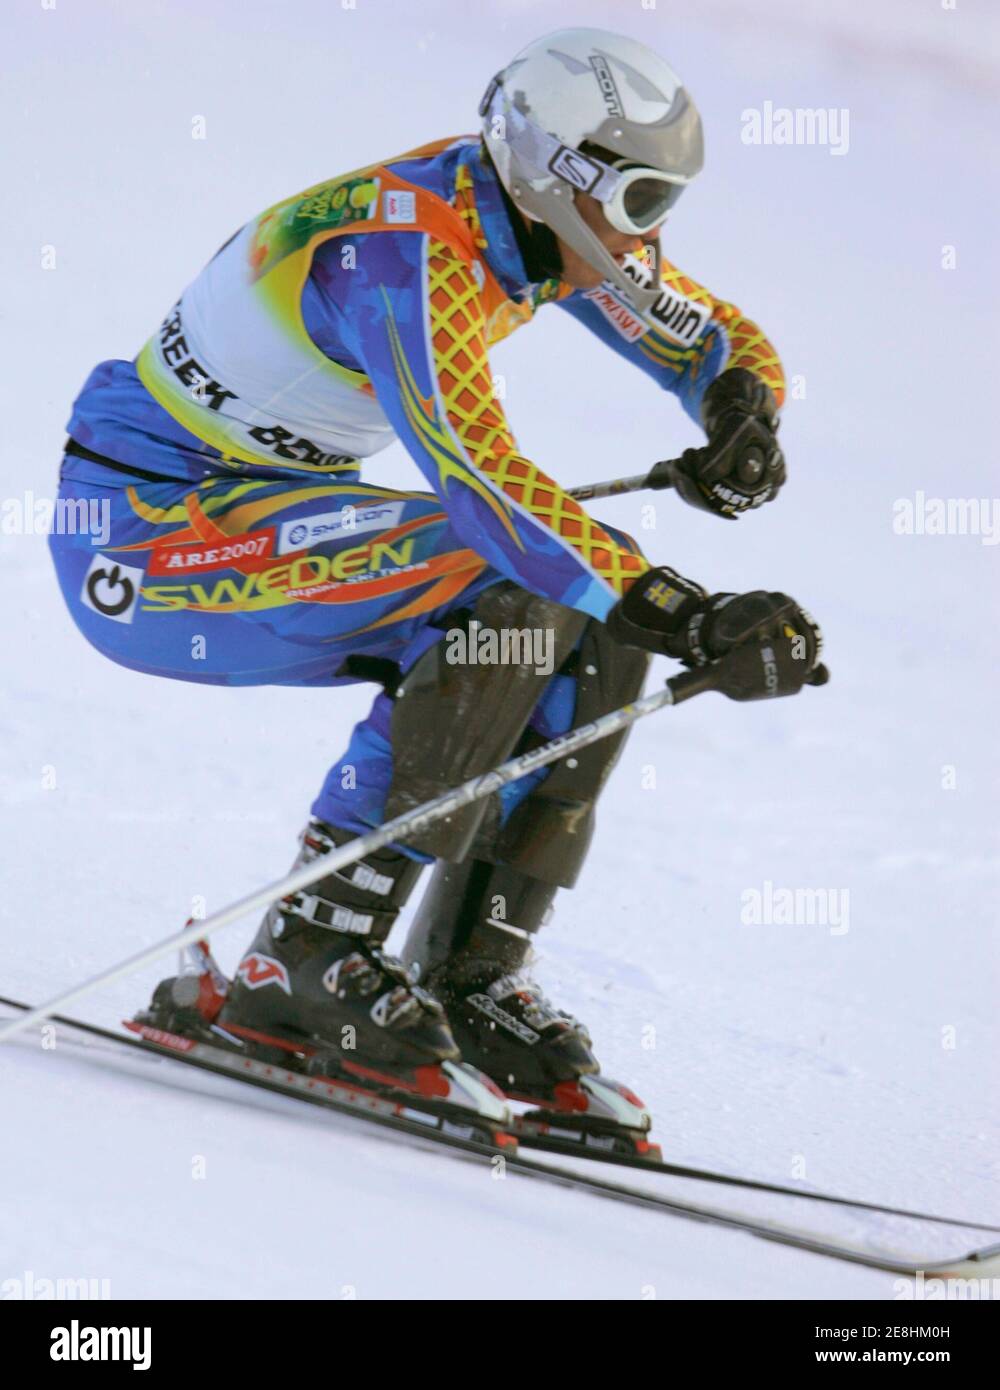 Andre Myhrer of Sweden skis to the best time in the first heat of the men's World Cup slalom in Beaver Creek, Colorado, December 3, 2006  REUTERS/Rick Wilking (UNITED STATES) Stock Photo